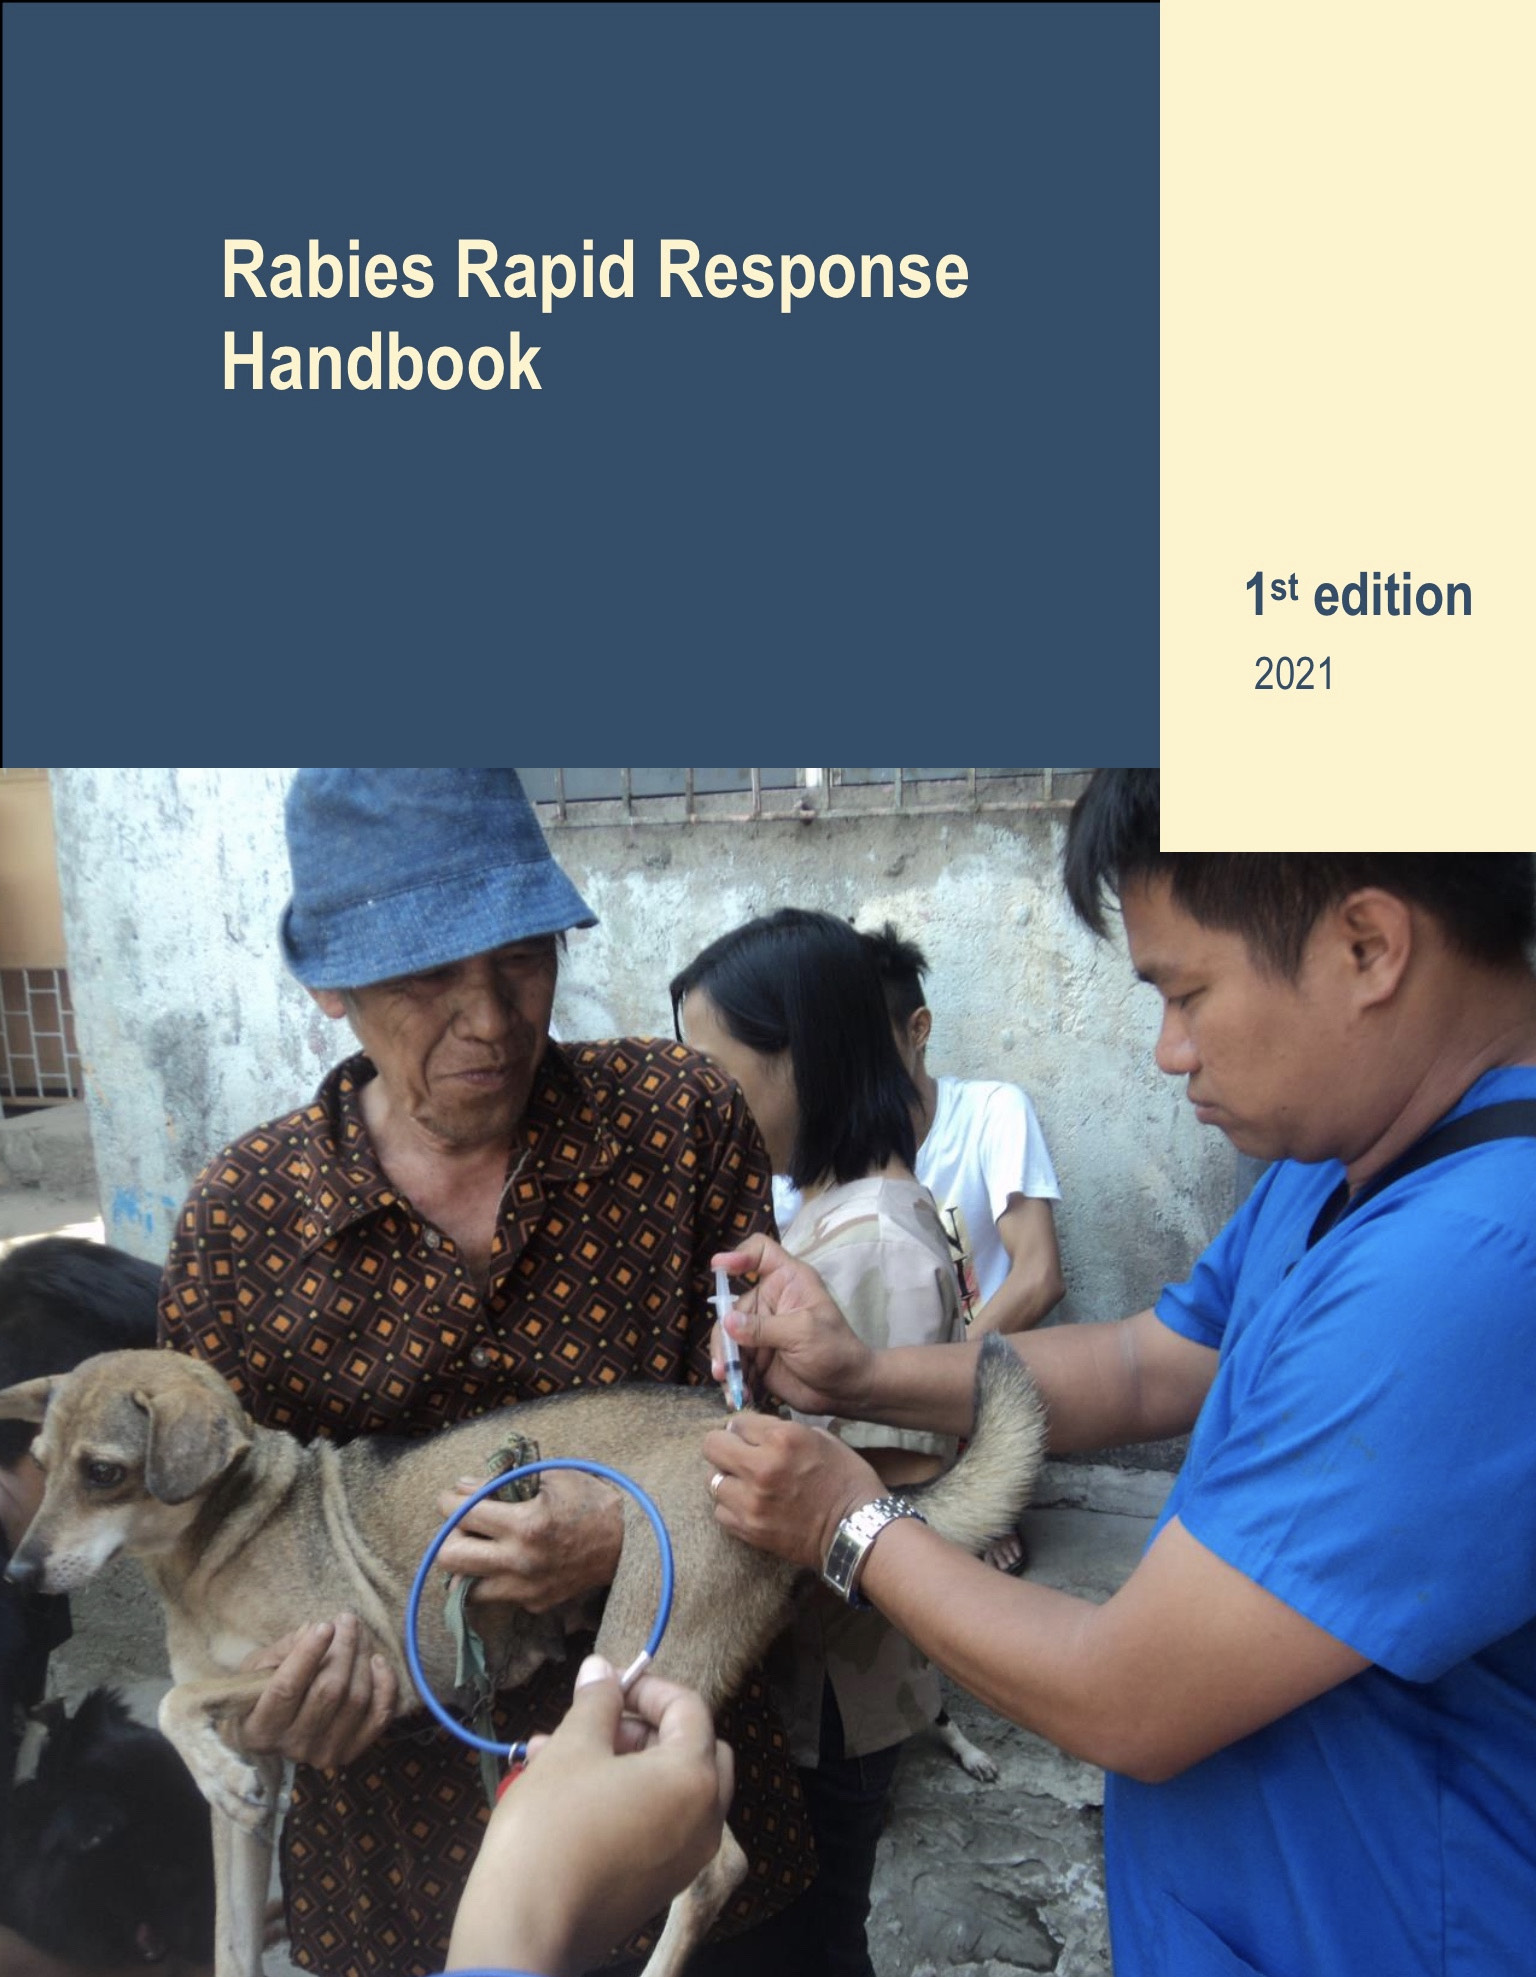 Philippines Rapid Response Toolkit for rabies developed by GARC and partners